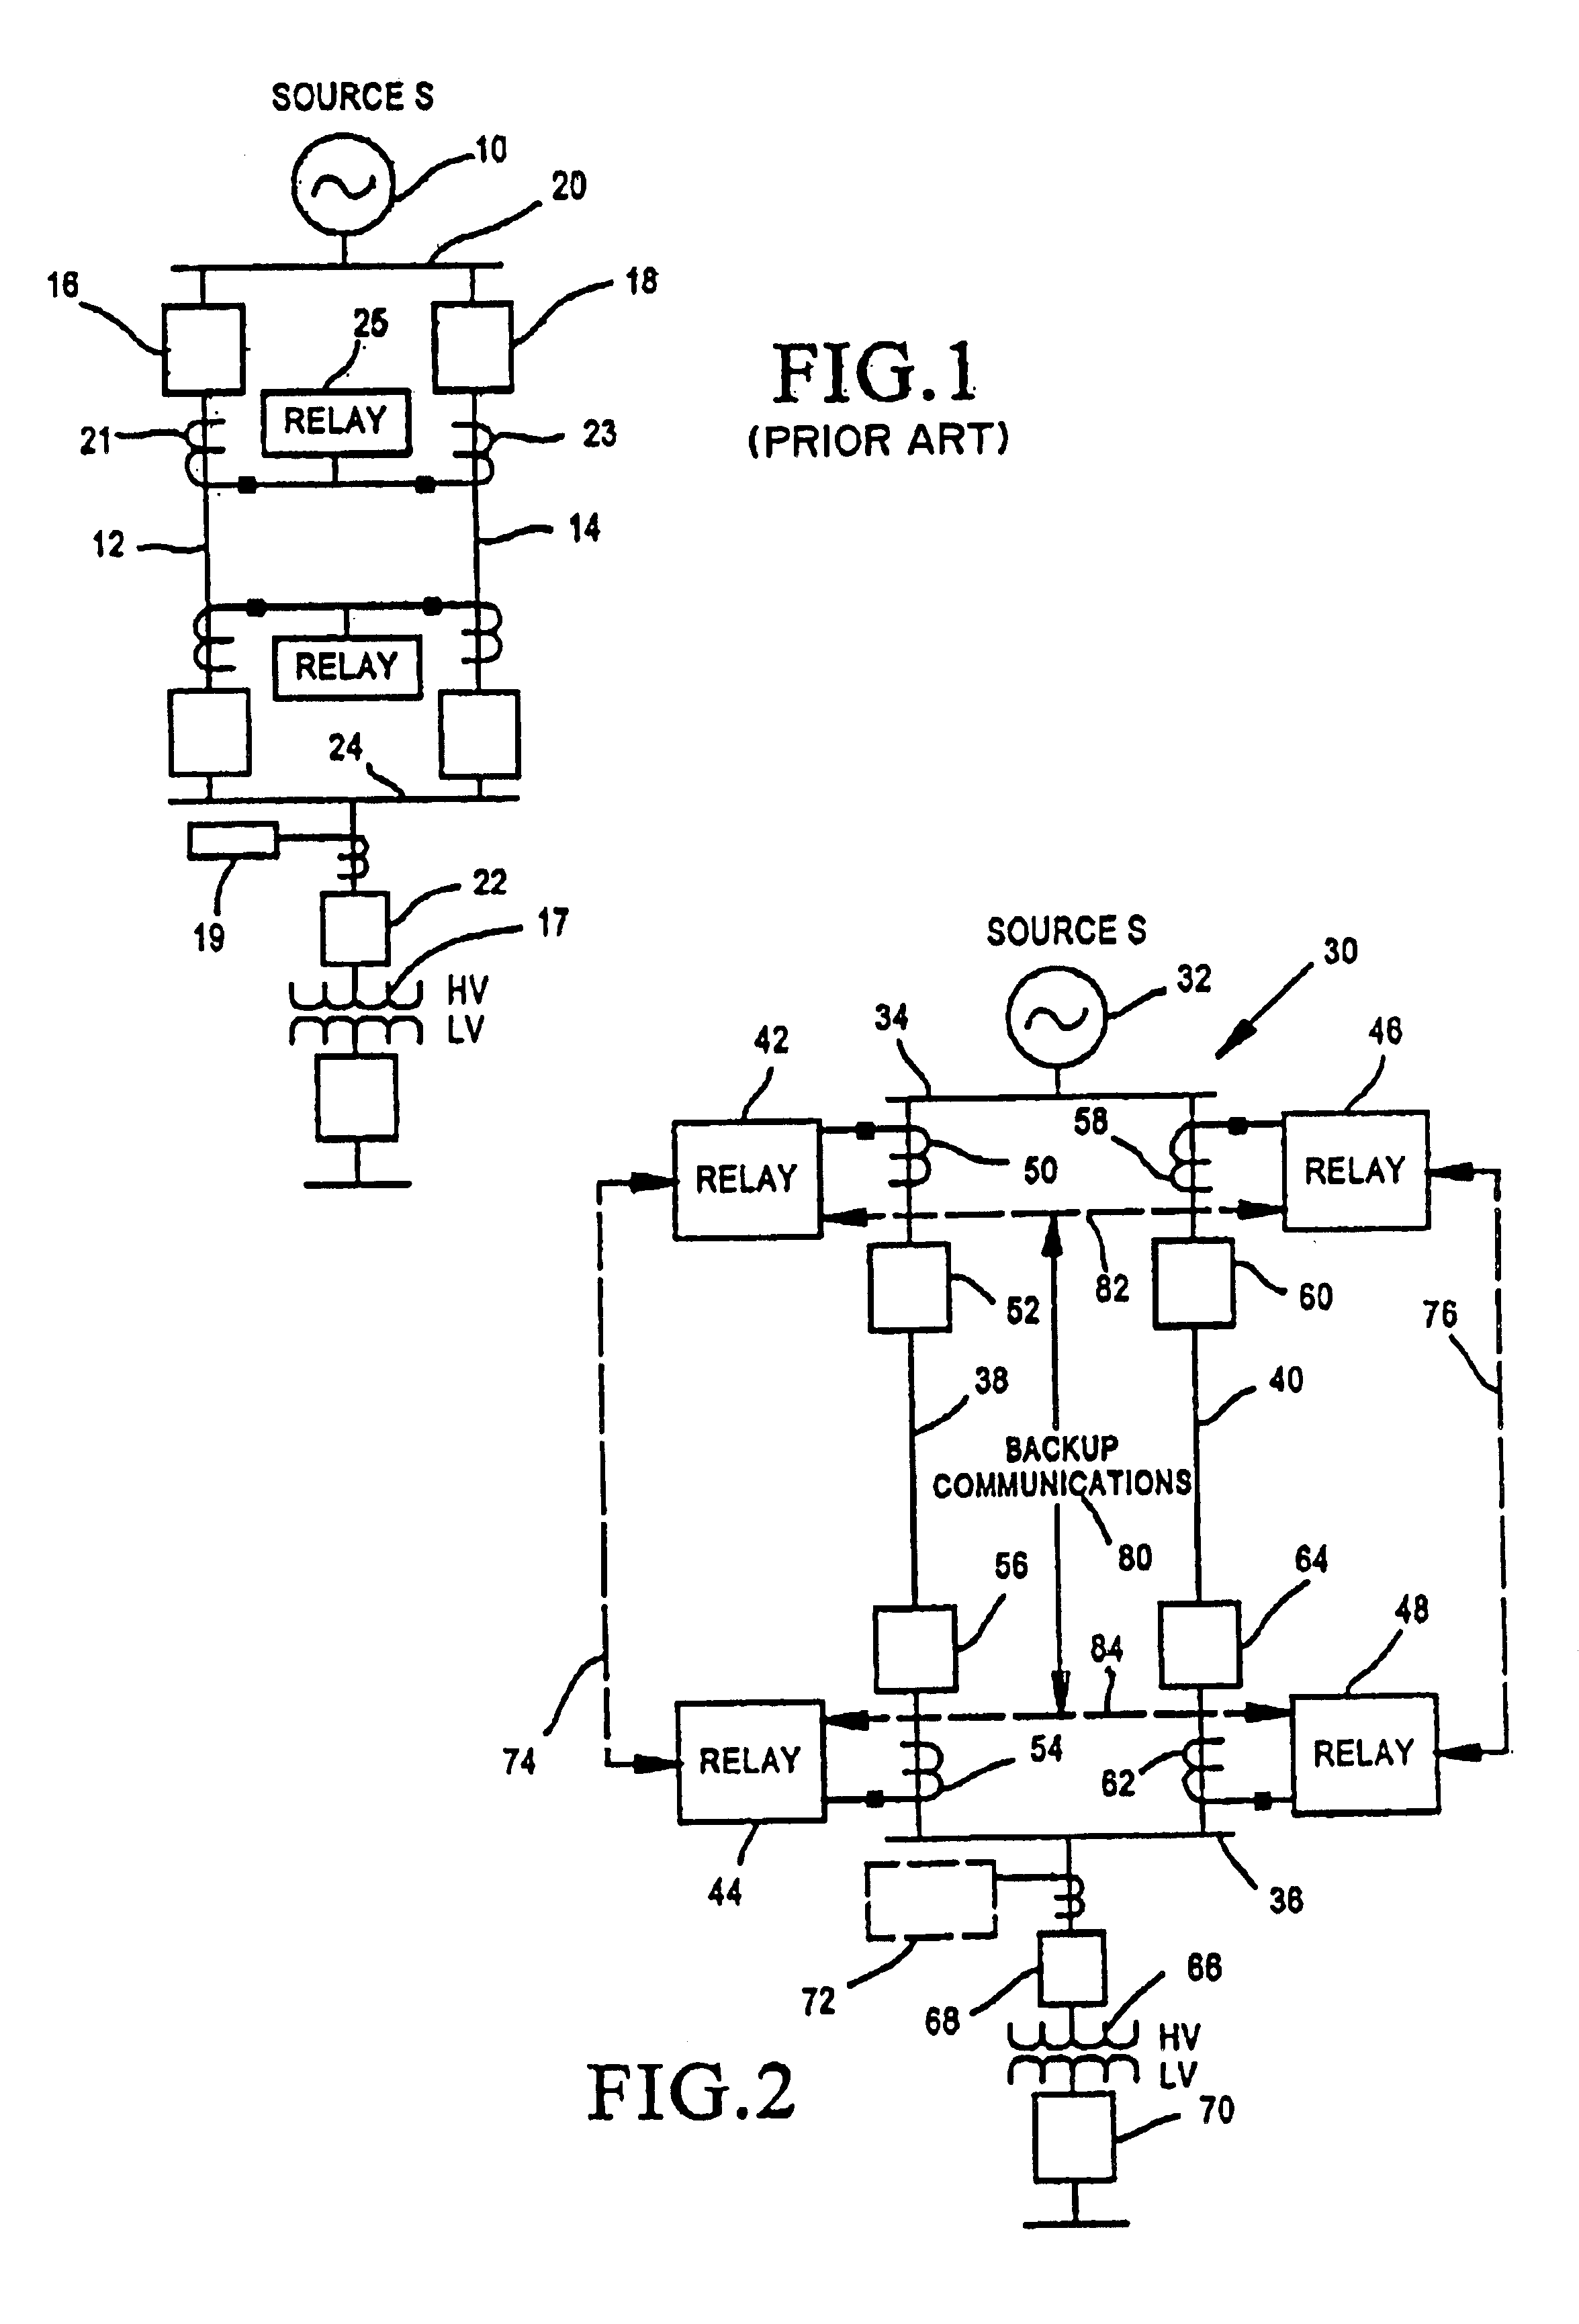 Bus total overcurrent system for a protective relay